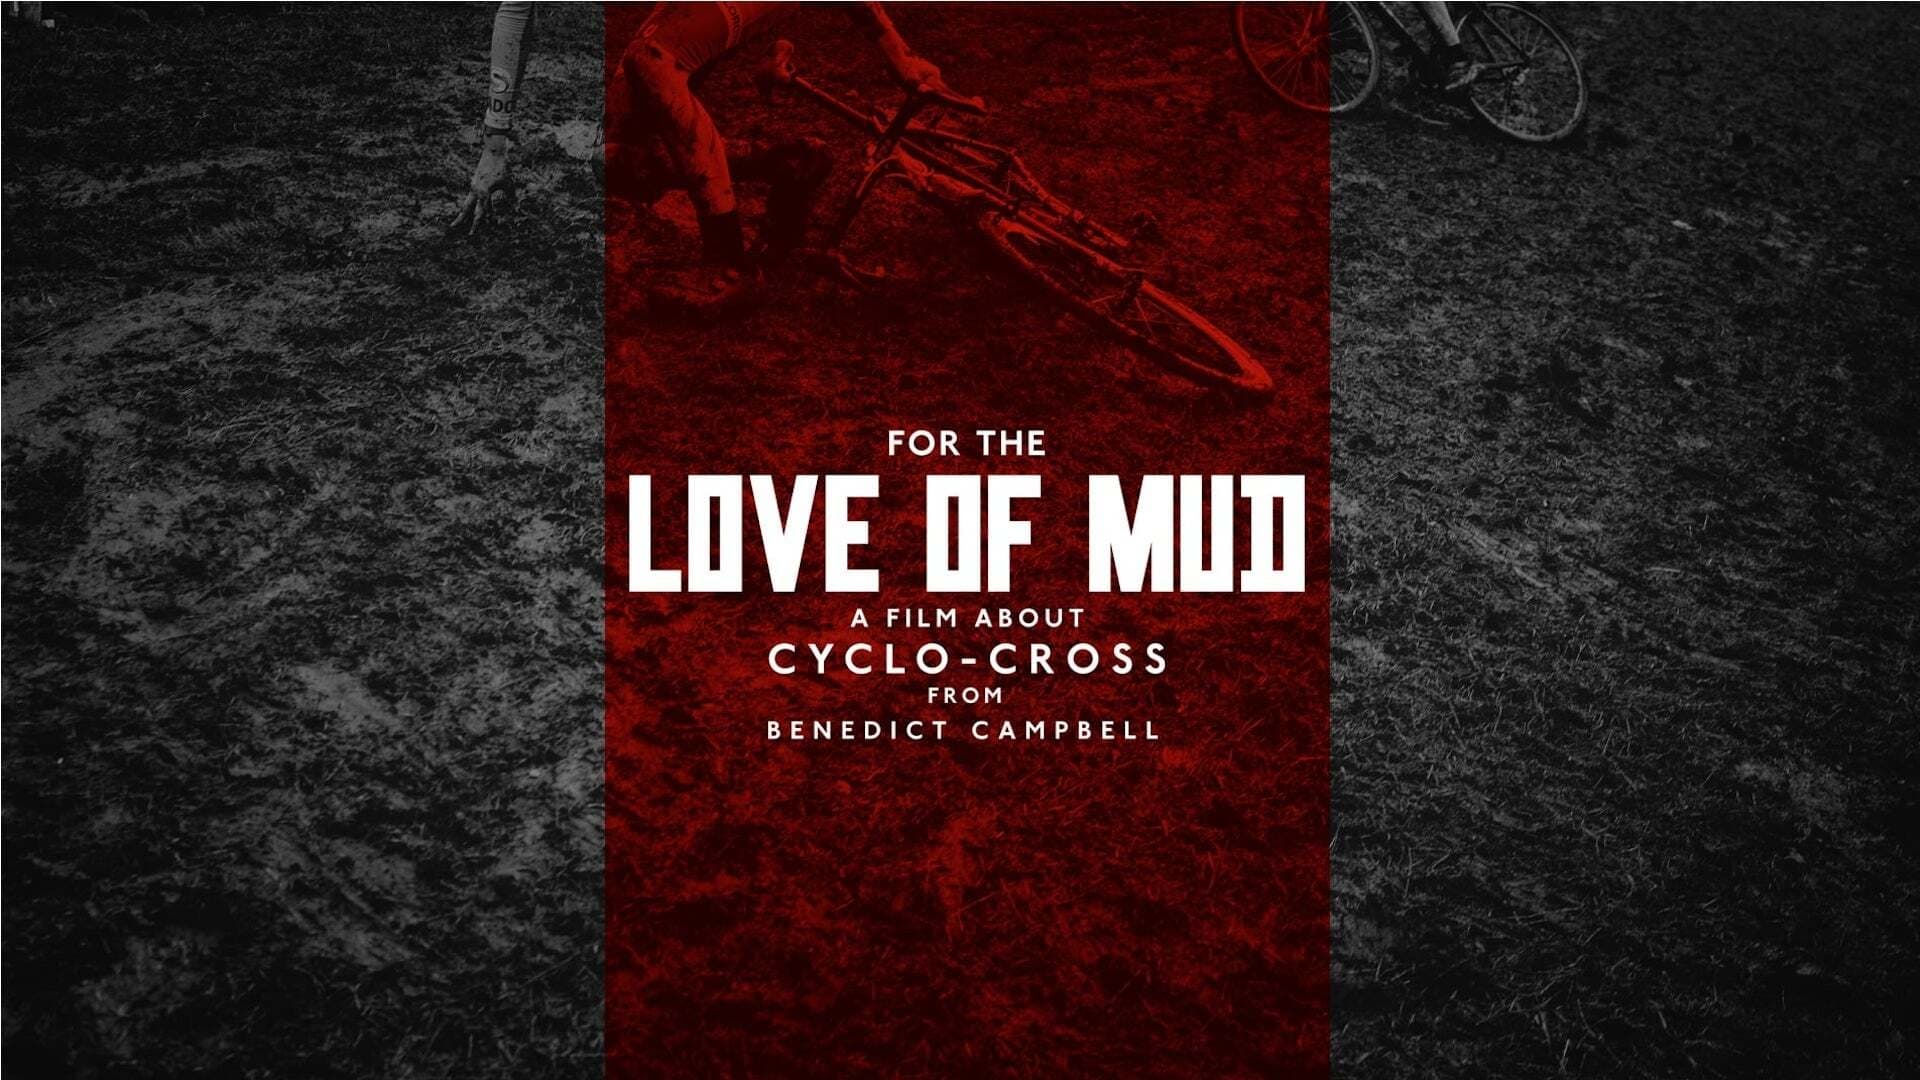 For the love of mud